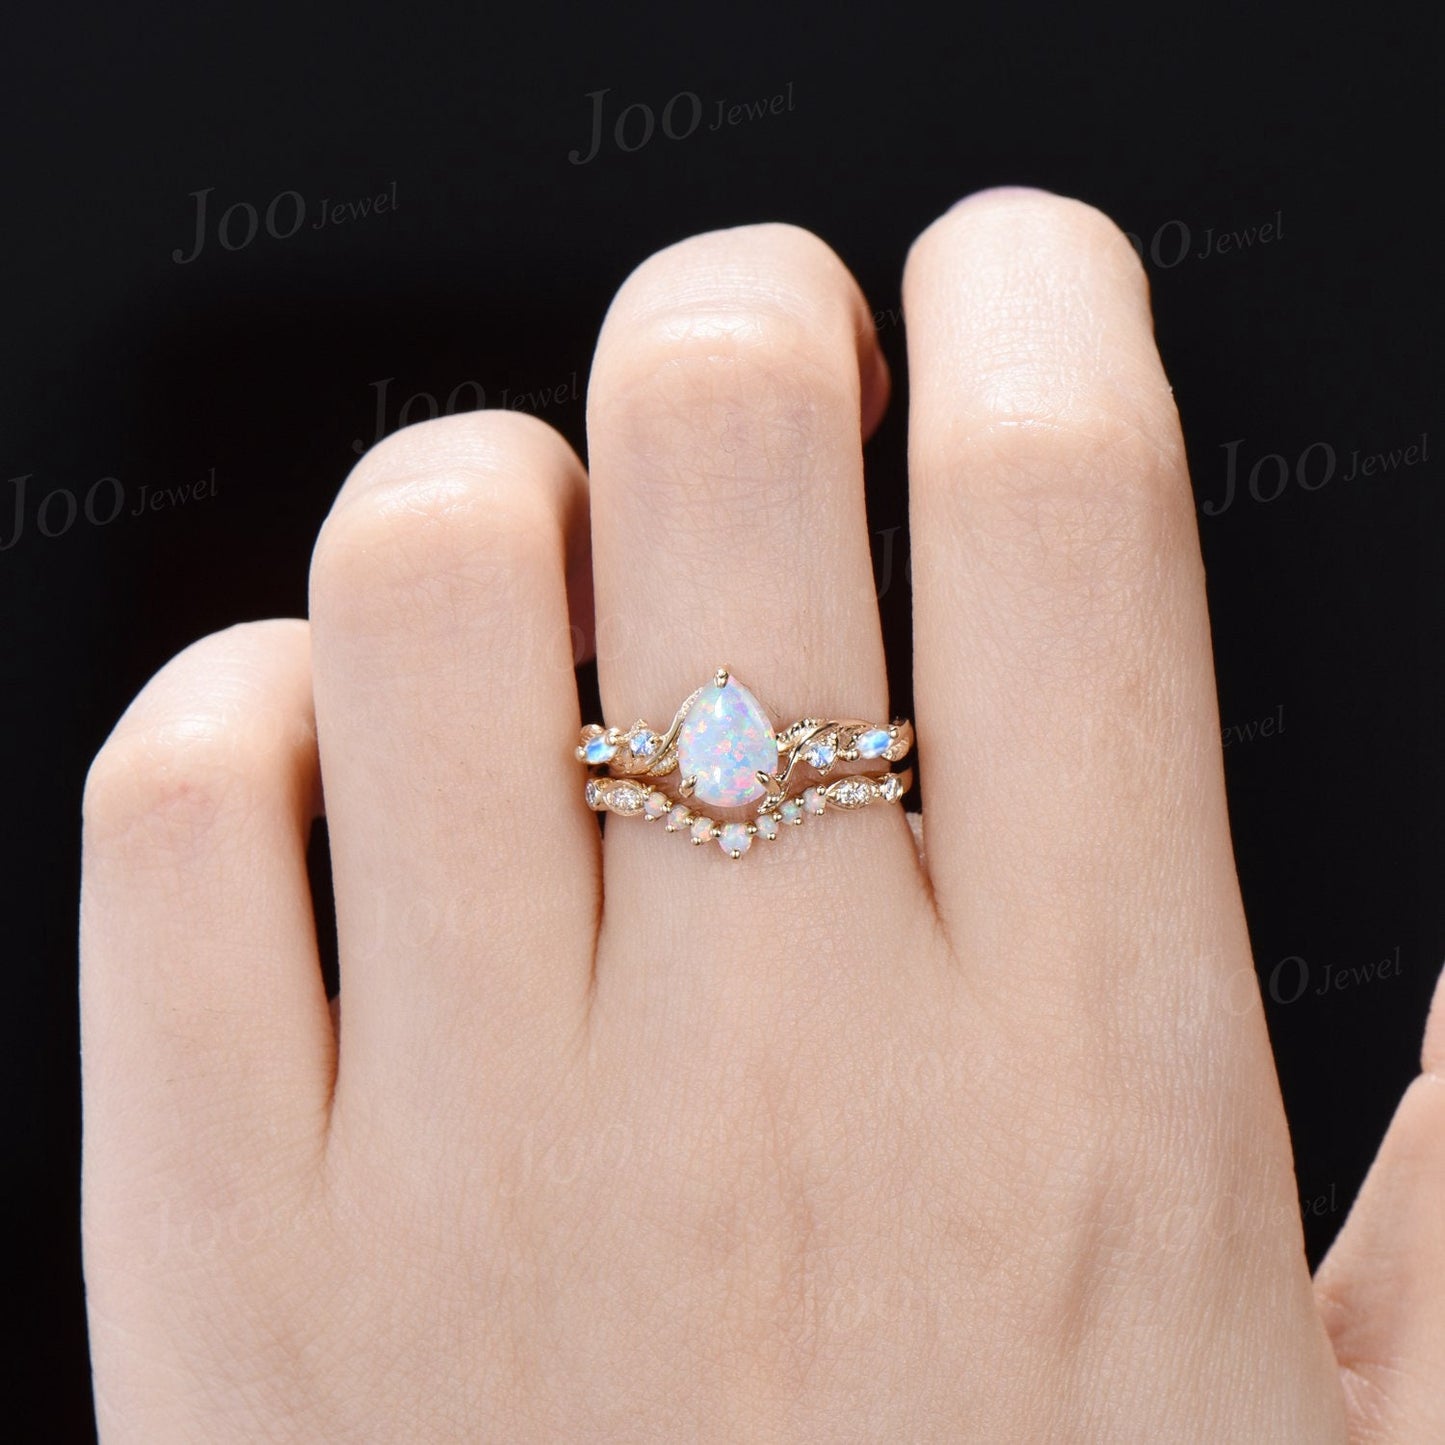 Twig Branch White Opal Ring Set 10K Gold 1.25ct Pear Fire Opal Moonstone Nature Engagement Ring Opal Wedding Band October Birthstone Gifts